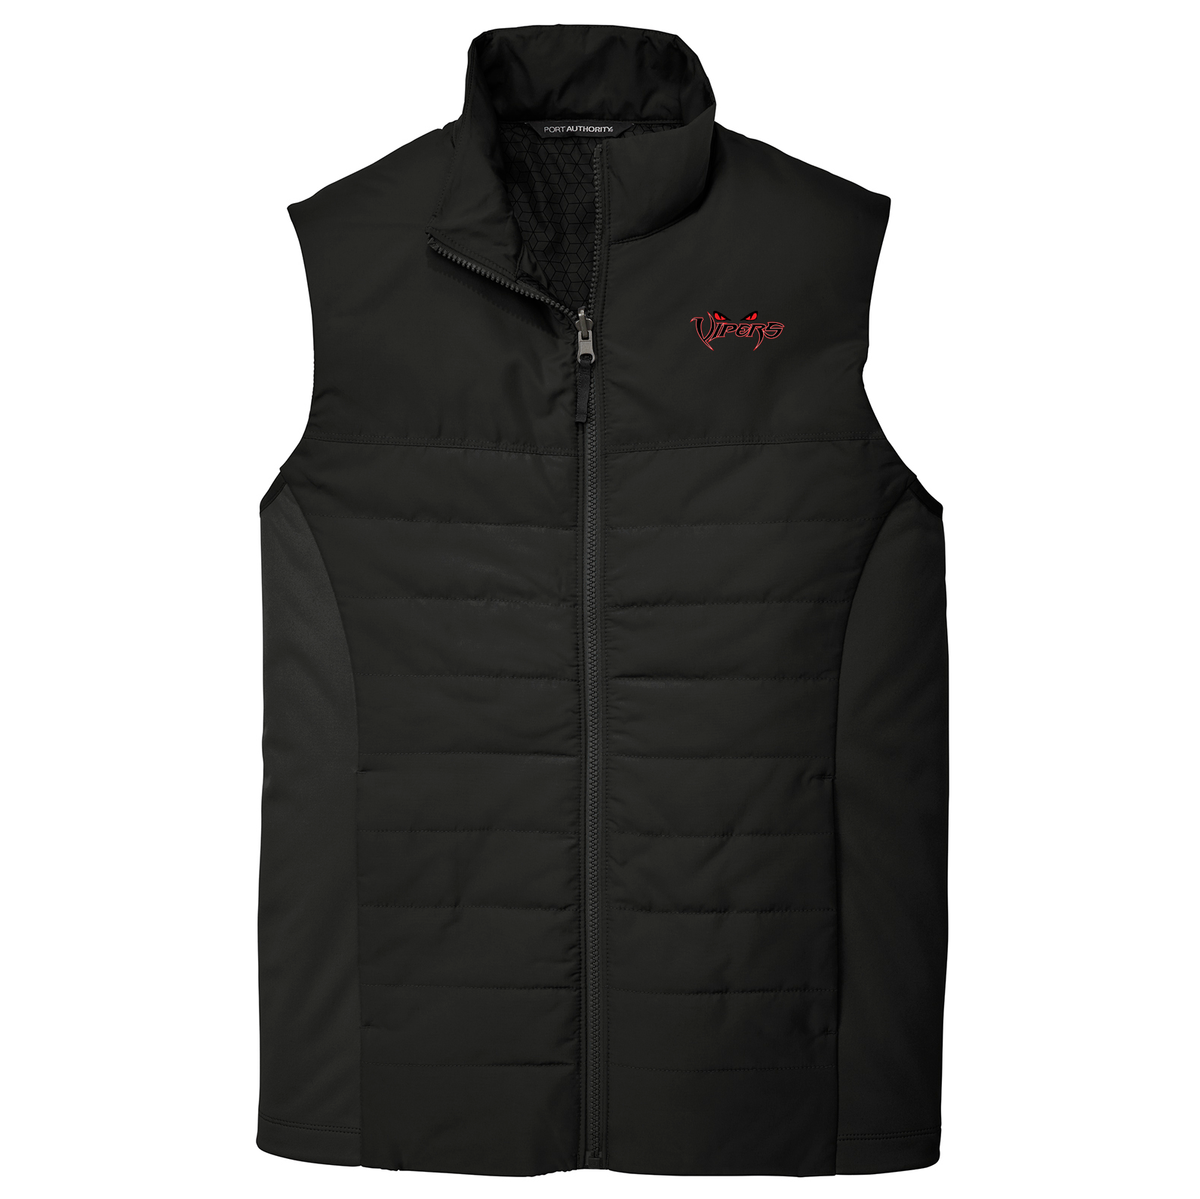 Vipers  Vest